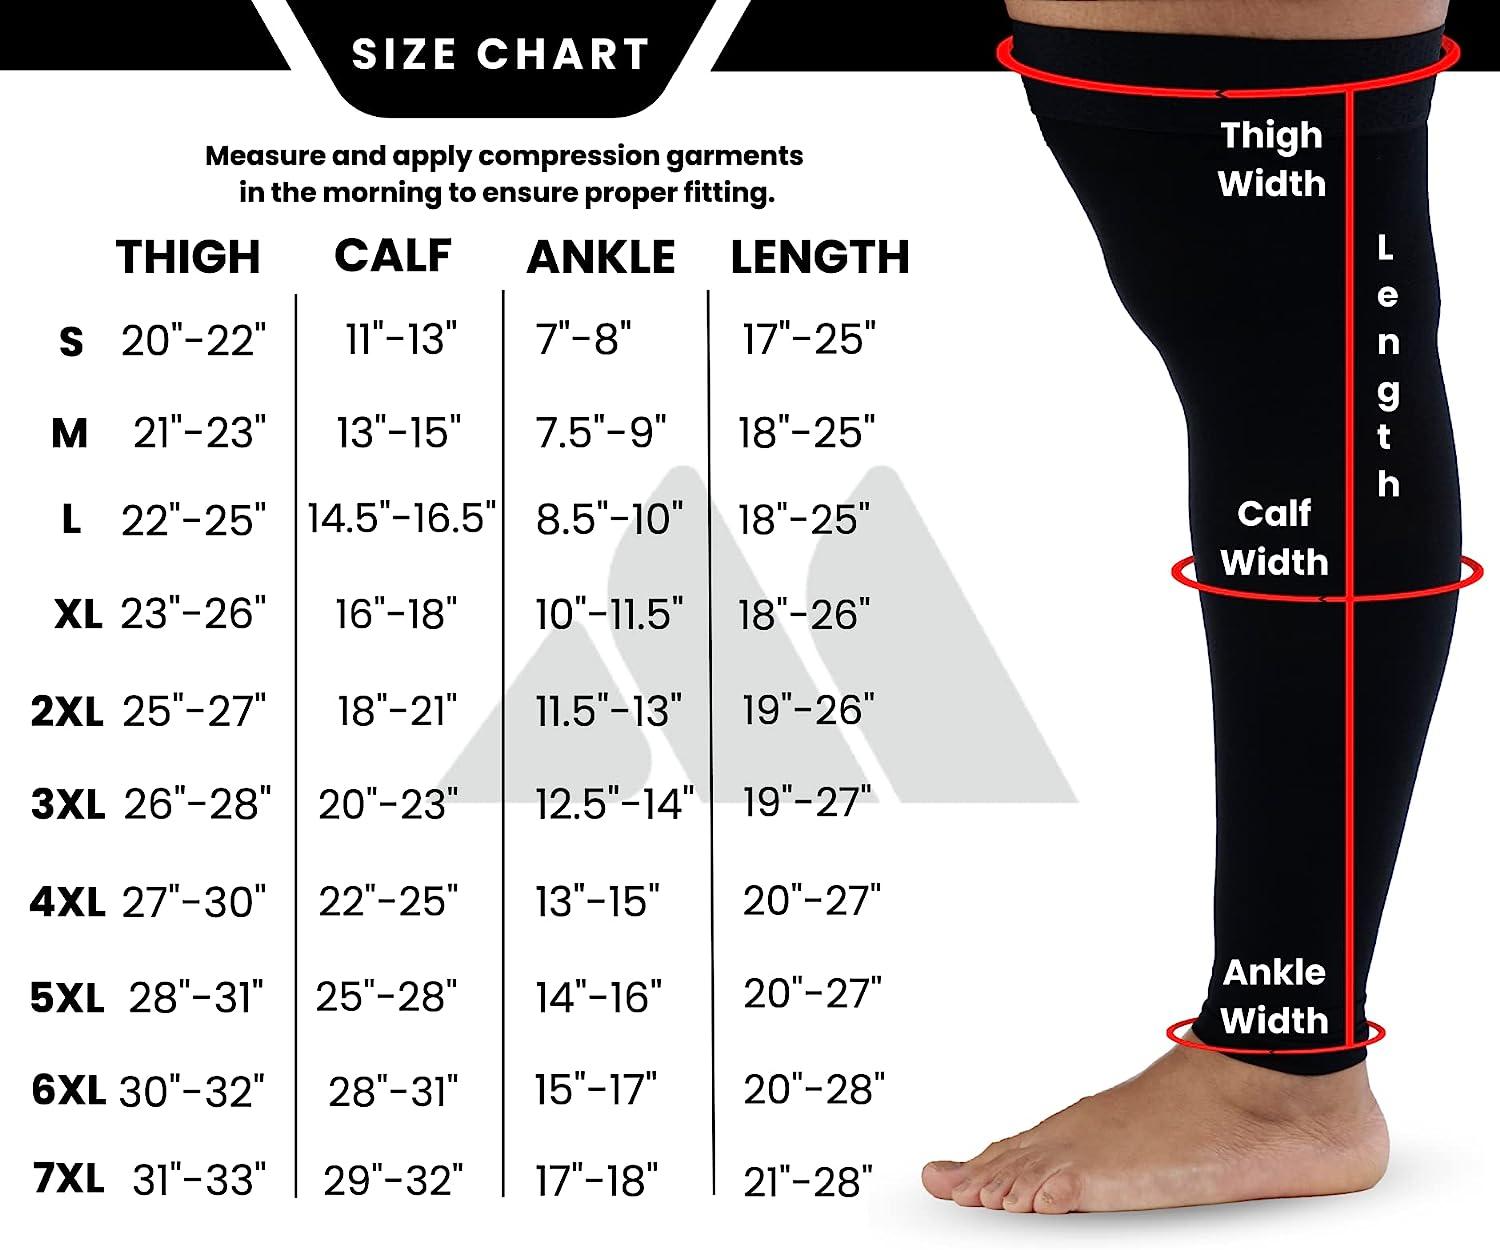 Mojo Compression Socks - 7XL Thigh-High Stockings with Grip Top for Relief  from Varicose Veins, Lymphedema, and Swelling - Black, Extra Wide Ankle,  Calf & Thigh Plus Size A609BL10 - Medical Compression